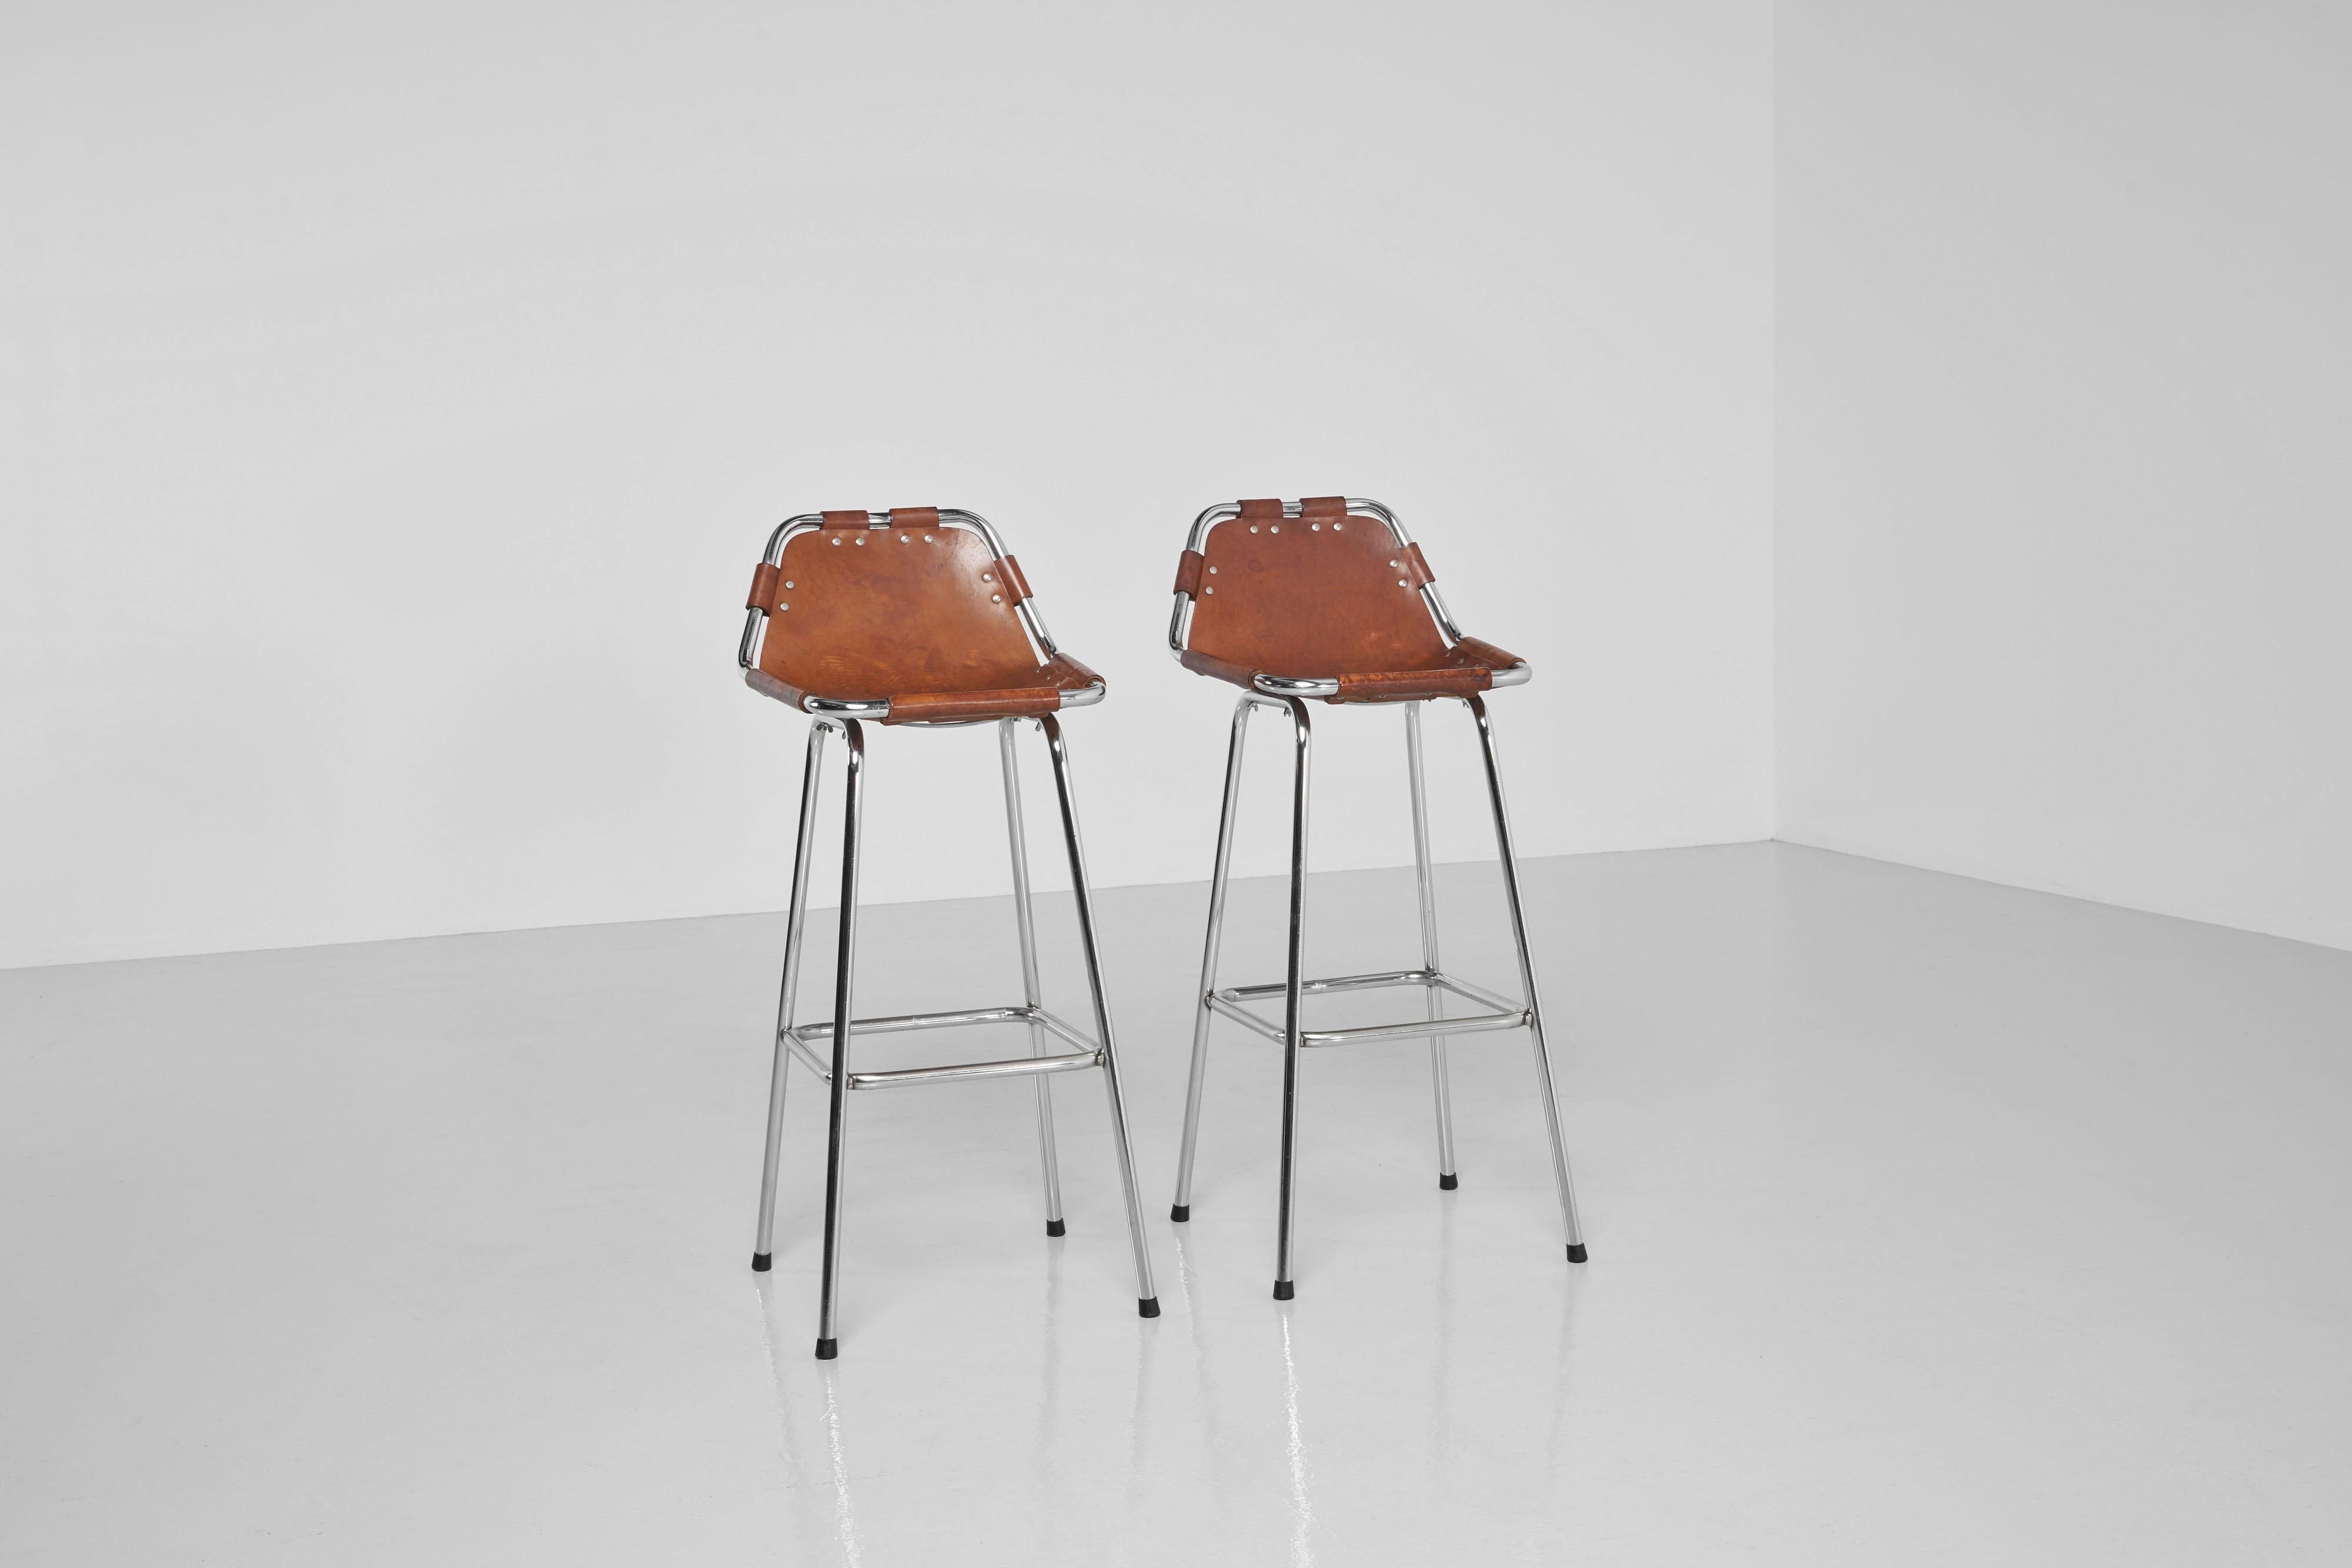 Beautiful and elegant set of bar stools made in France in 1960. These stools are designed with great attention to detail. Even though the designer is unknown, they were designed in the style of the chairs that Charlotte Perriand selected for the Les